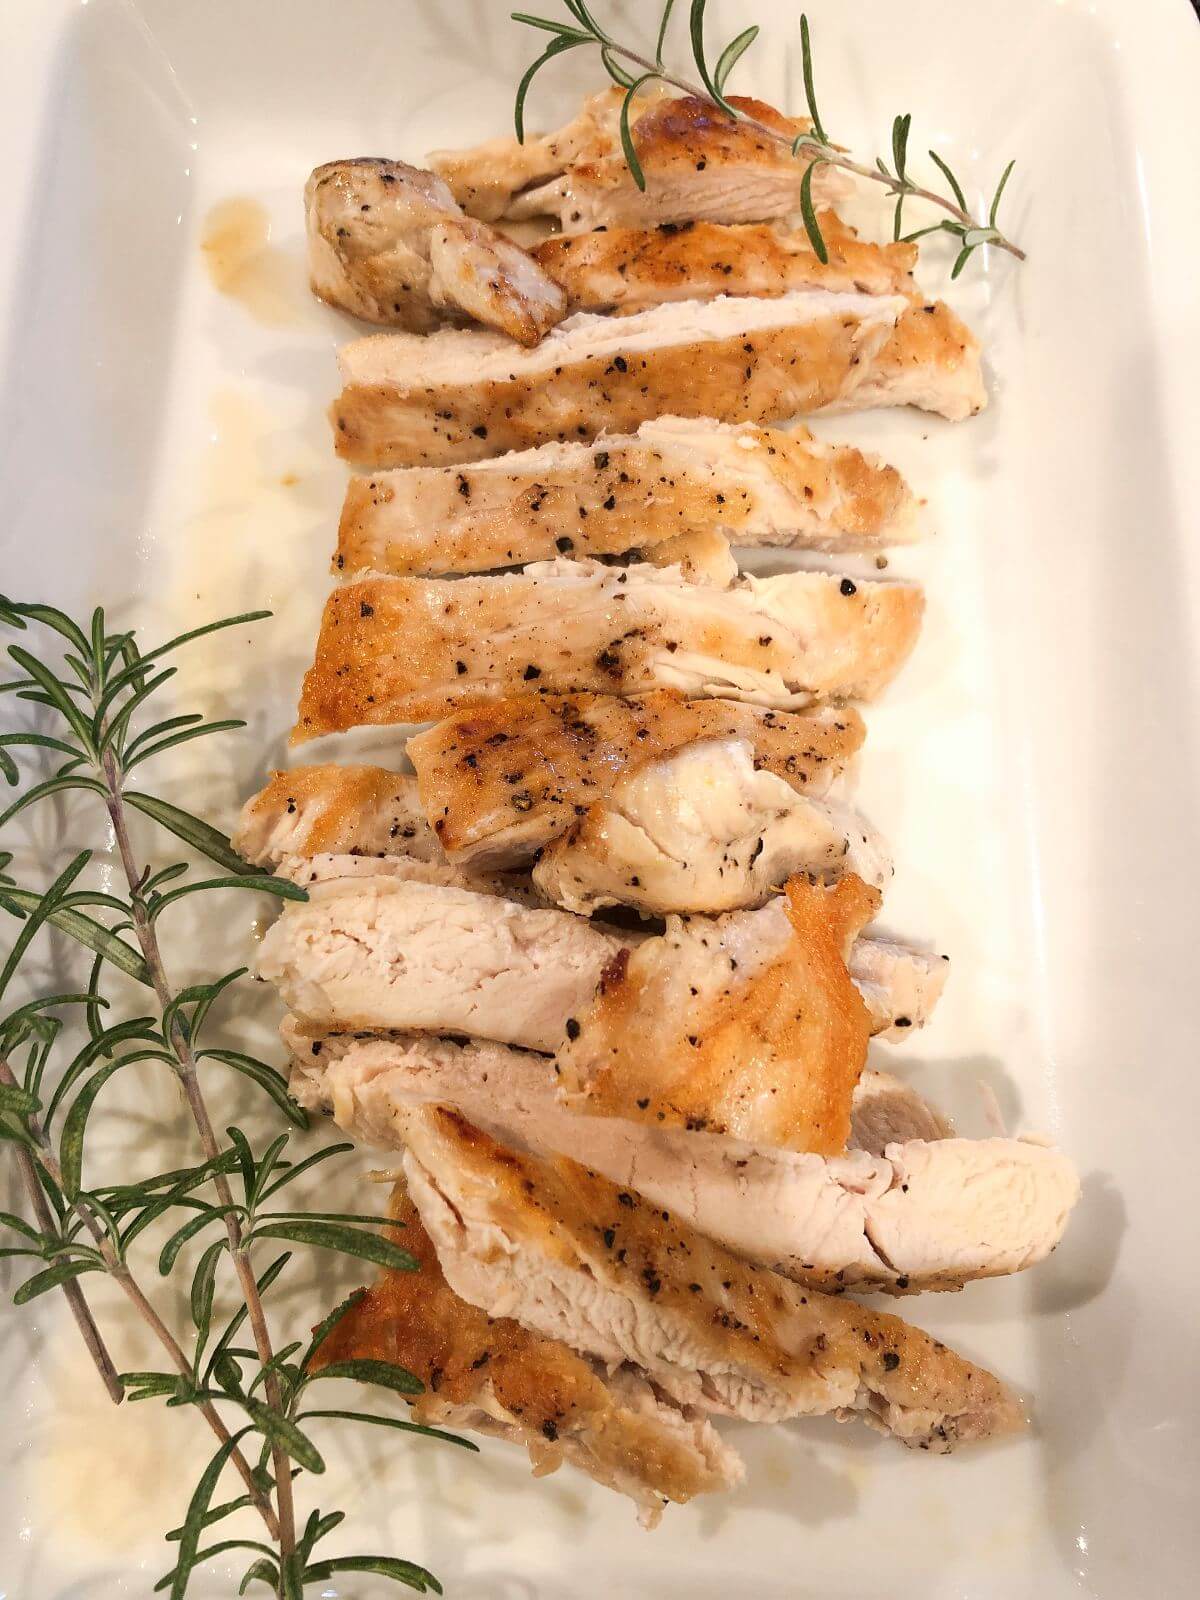 Cooked chicken on a white plate with rosemary